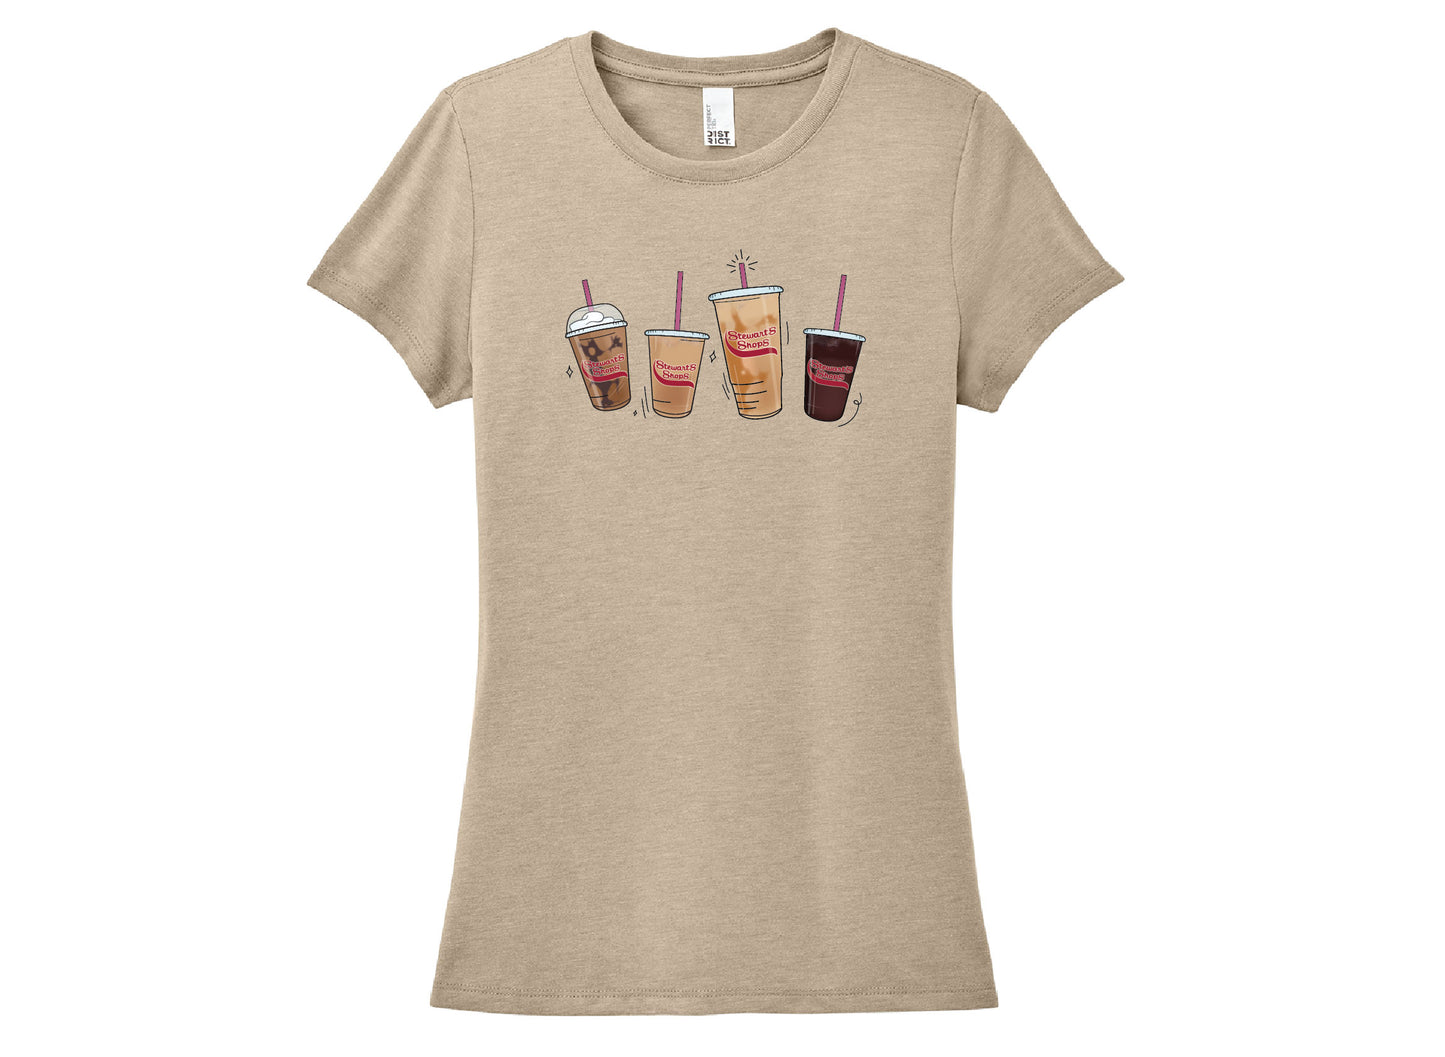 Tan tshirt with 4 stewarts iced coffees featured on the front